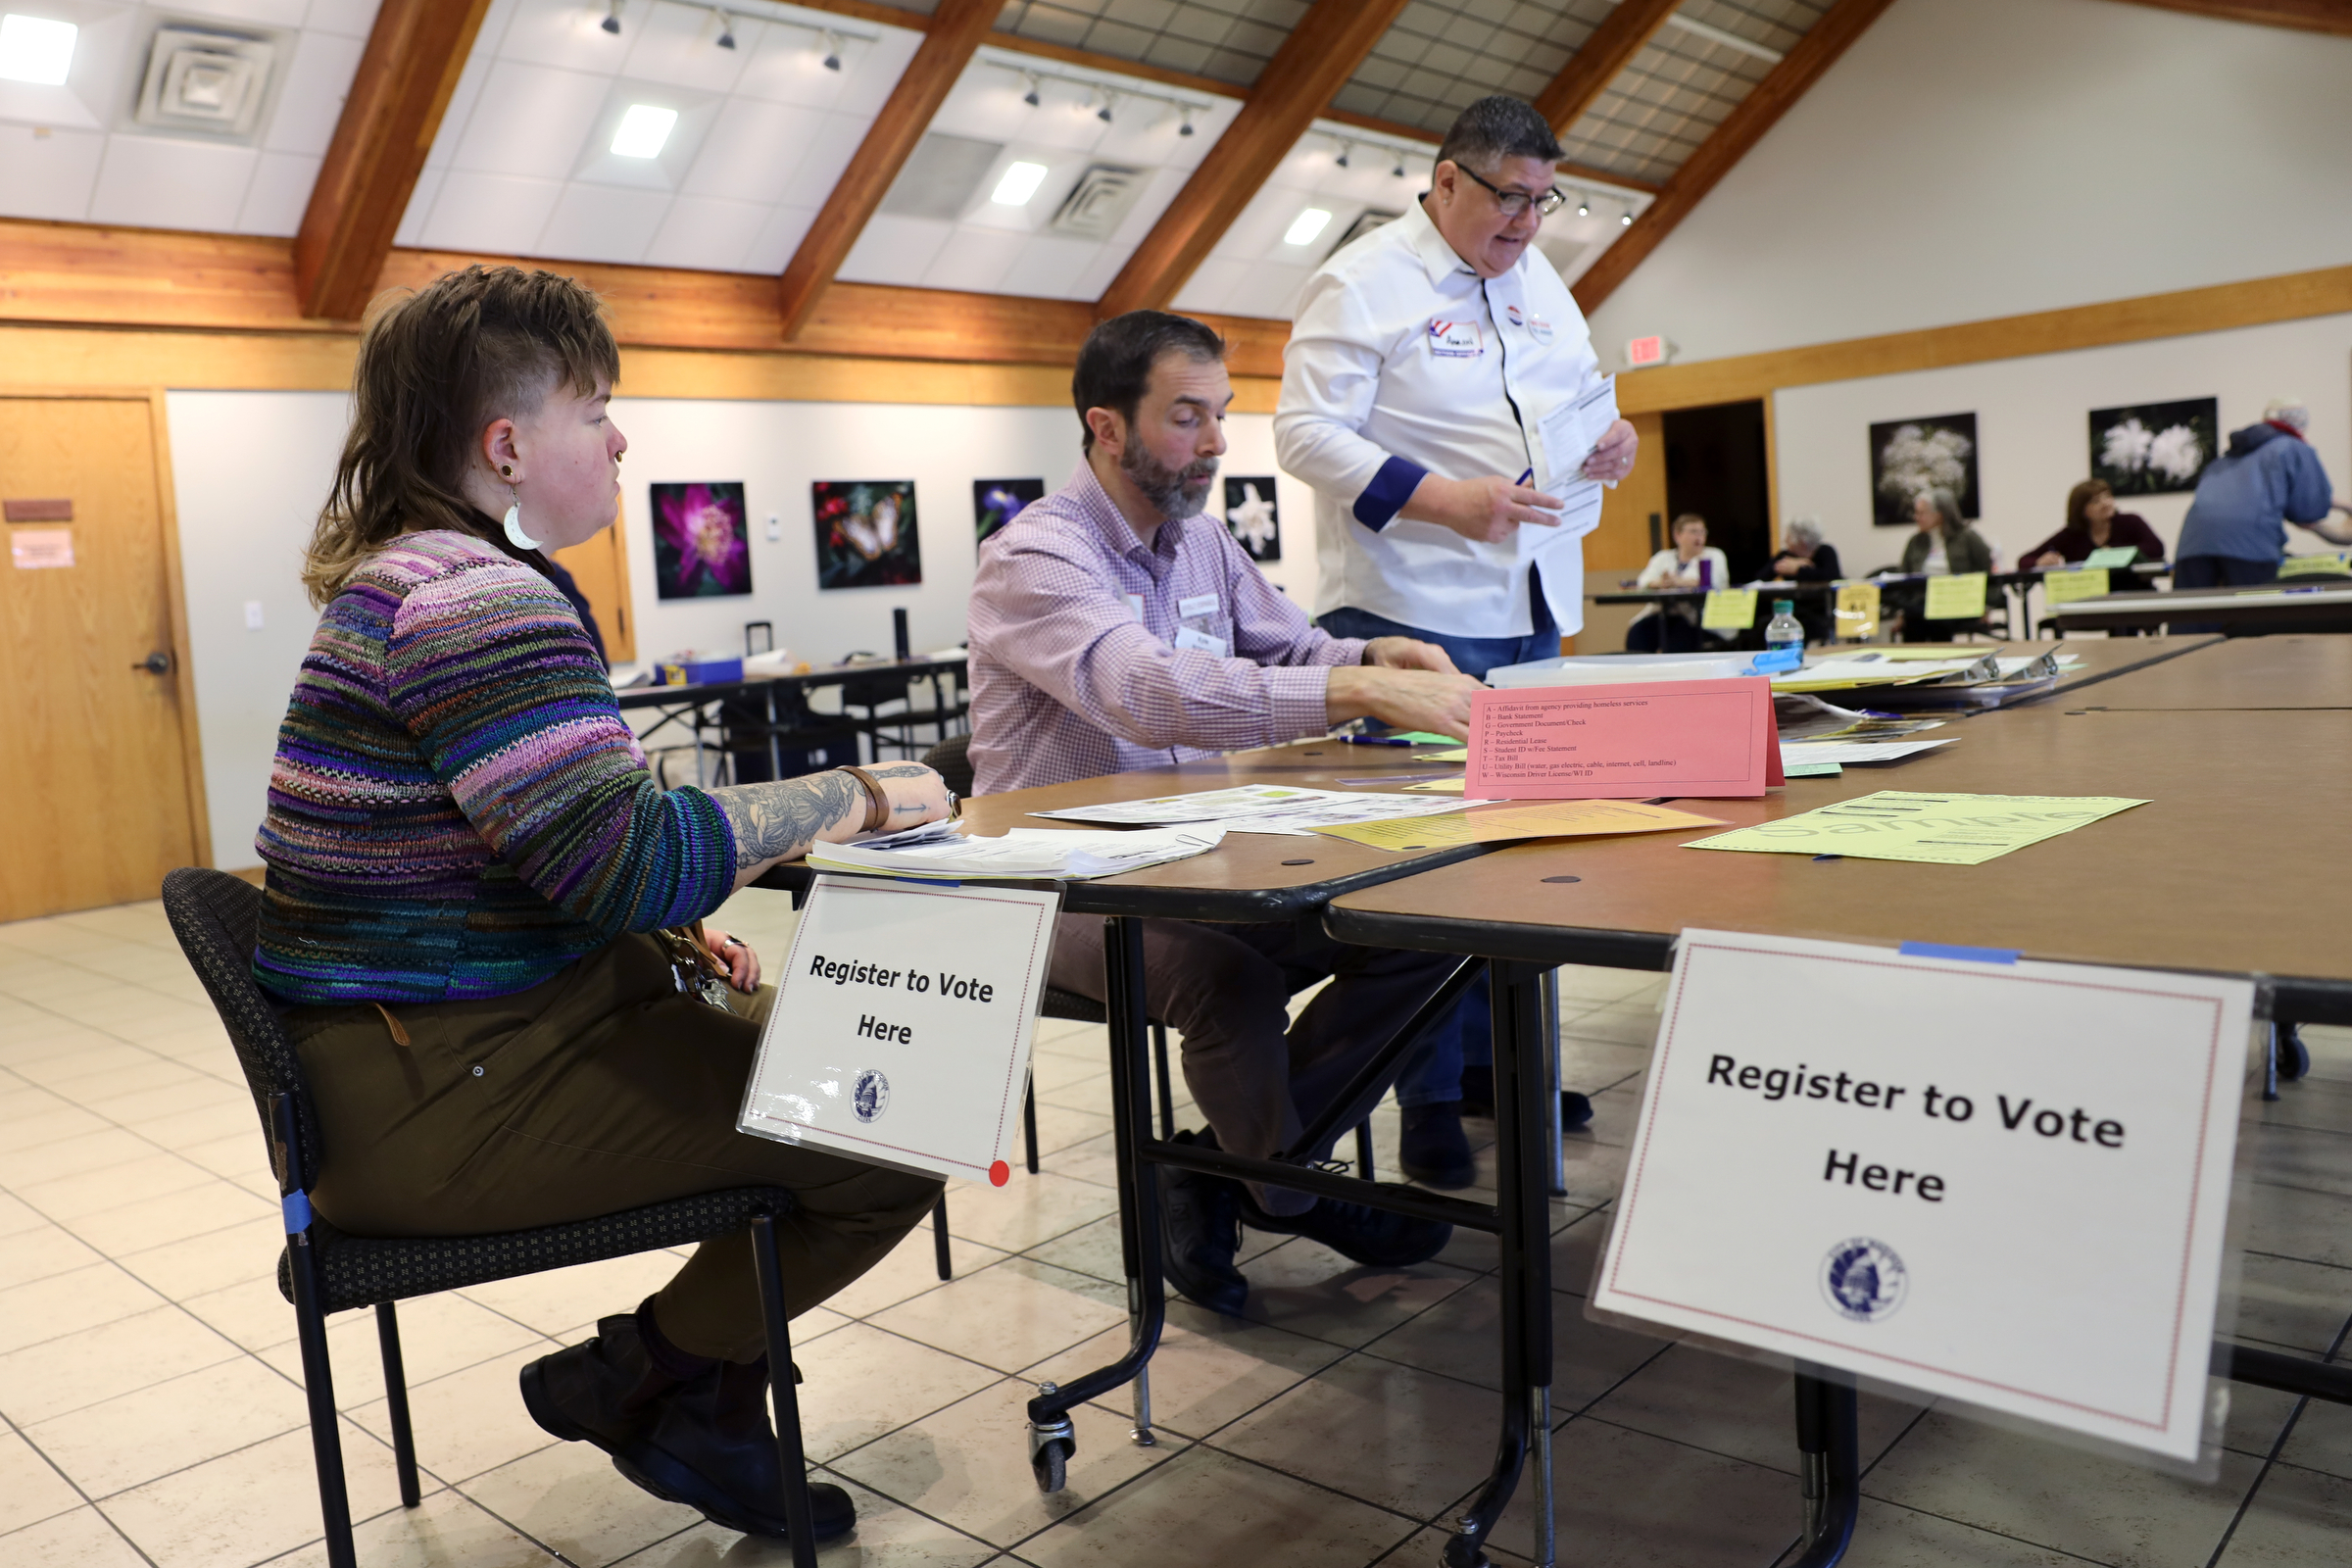 Alix Yarrow, left, registers to vote at the polling place